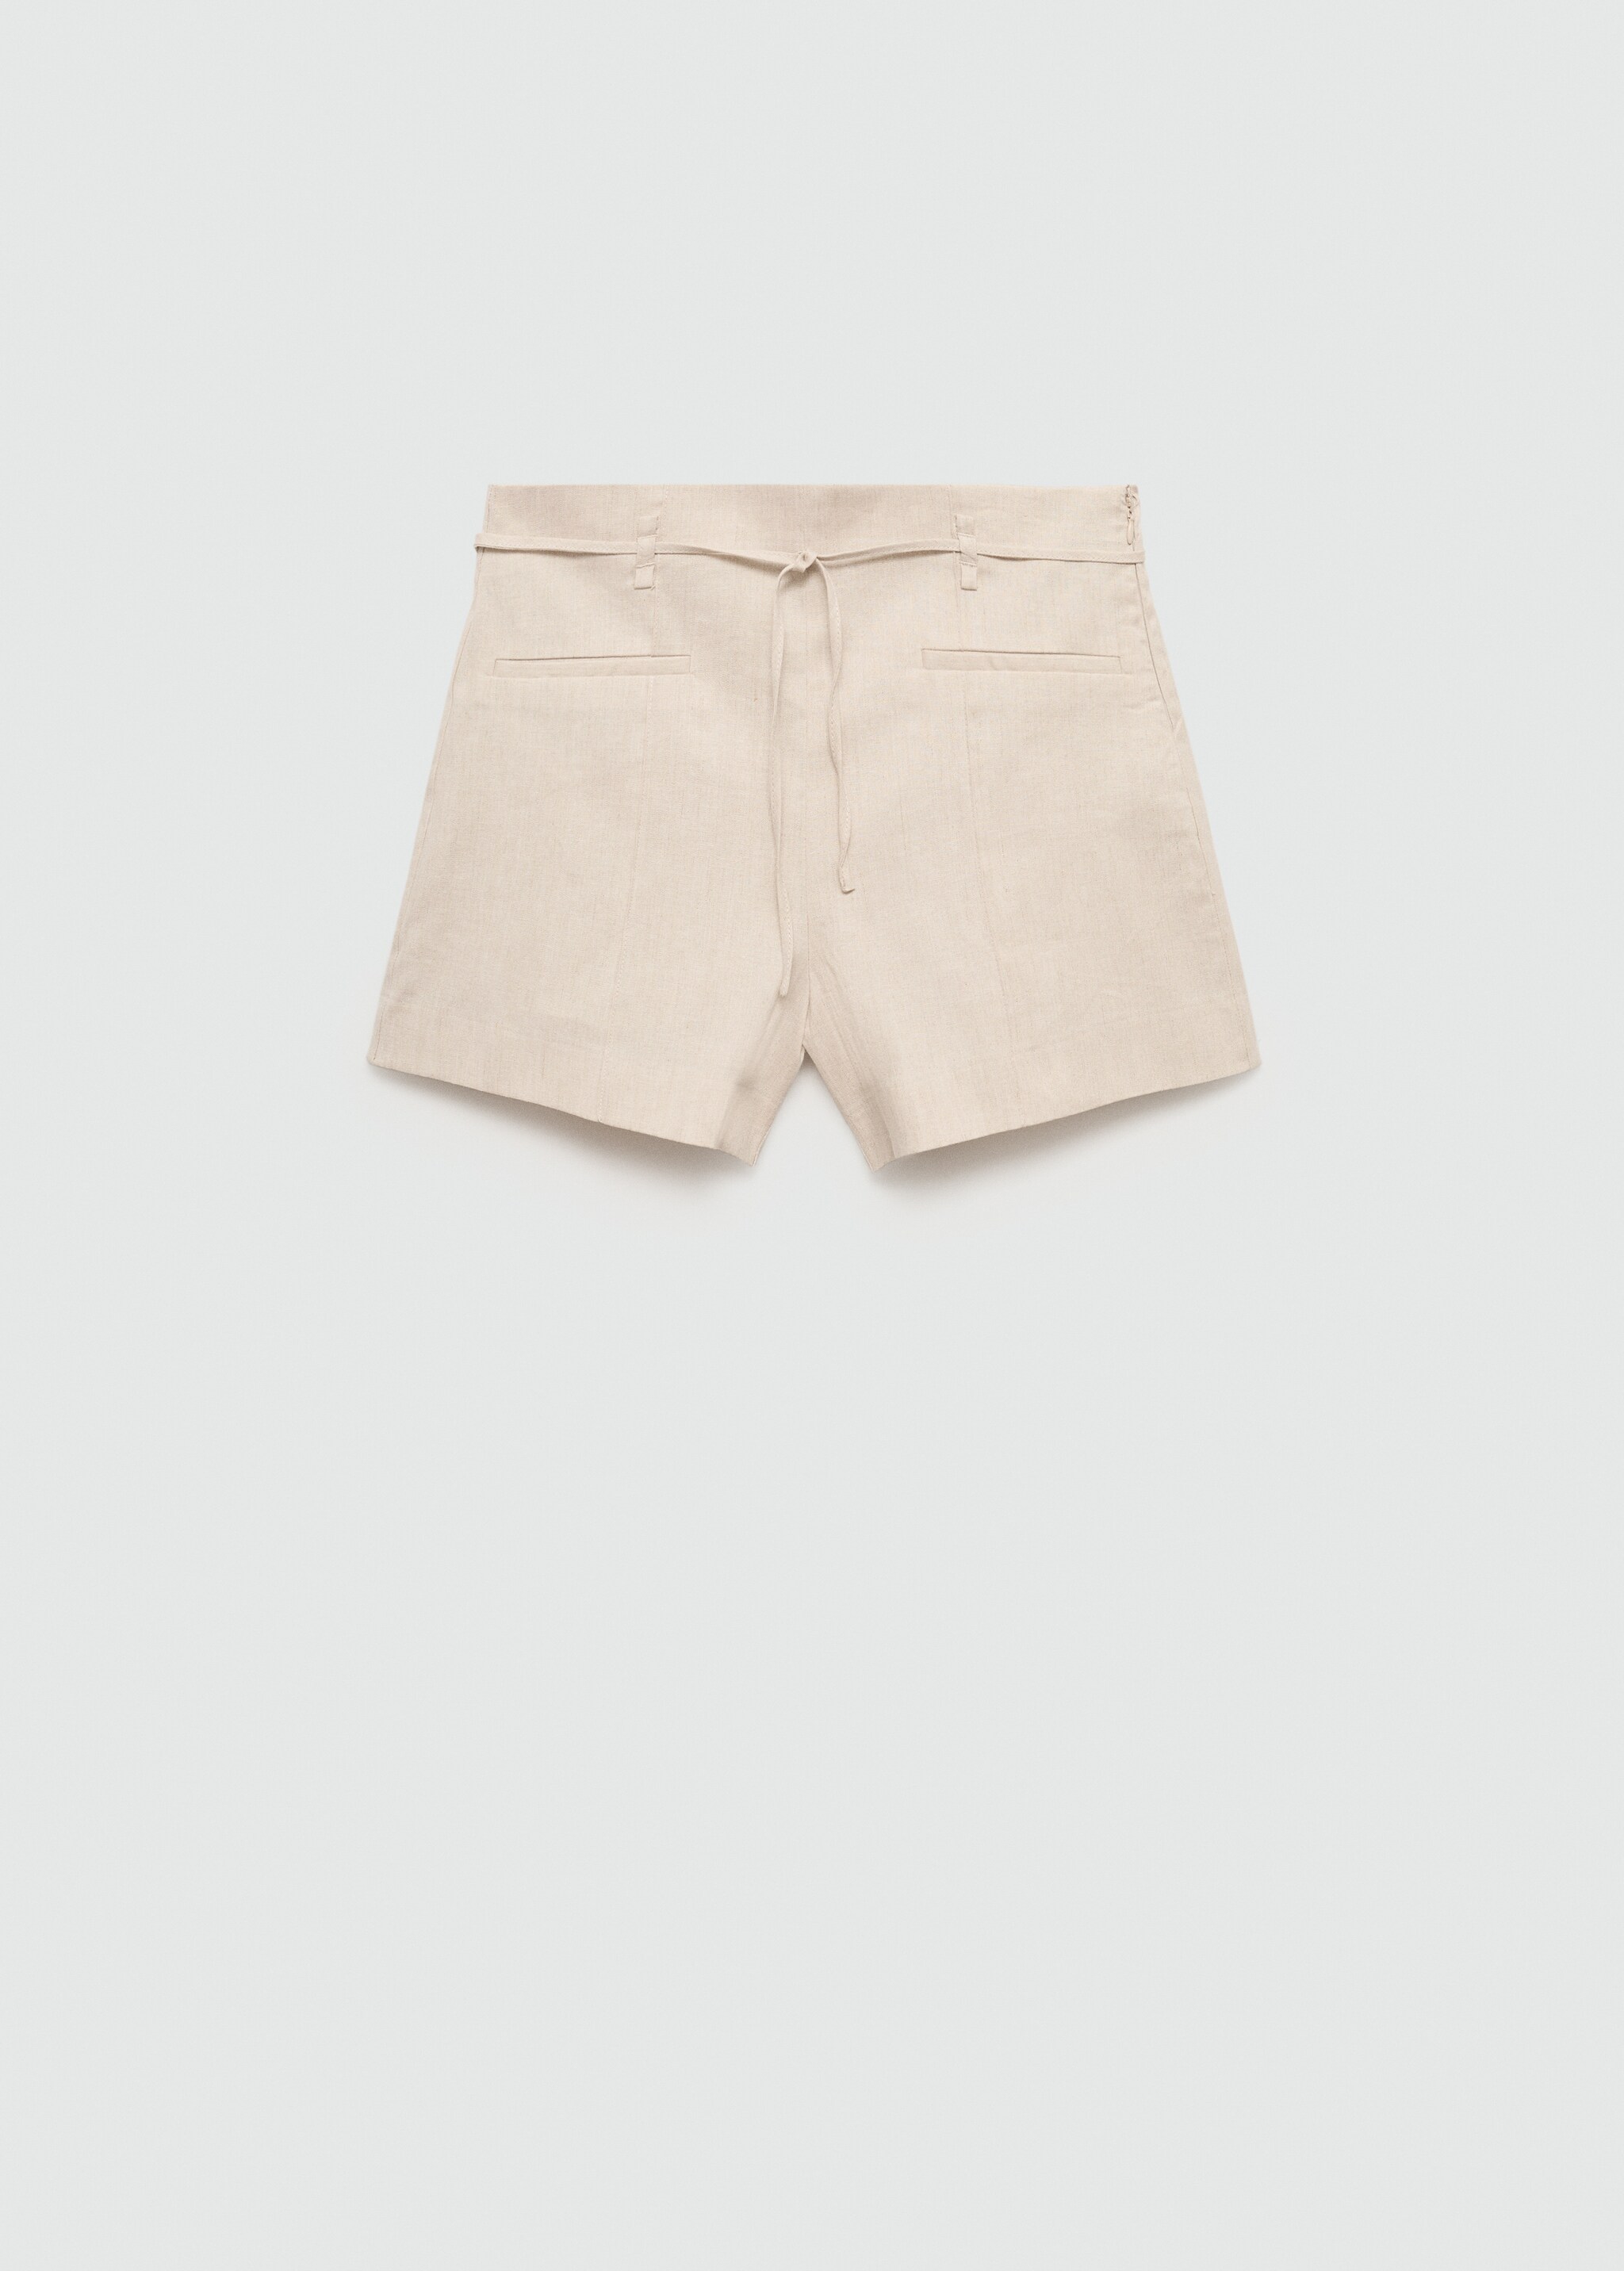 Shorts linen bow - Article without model